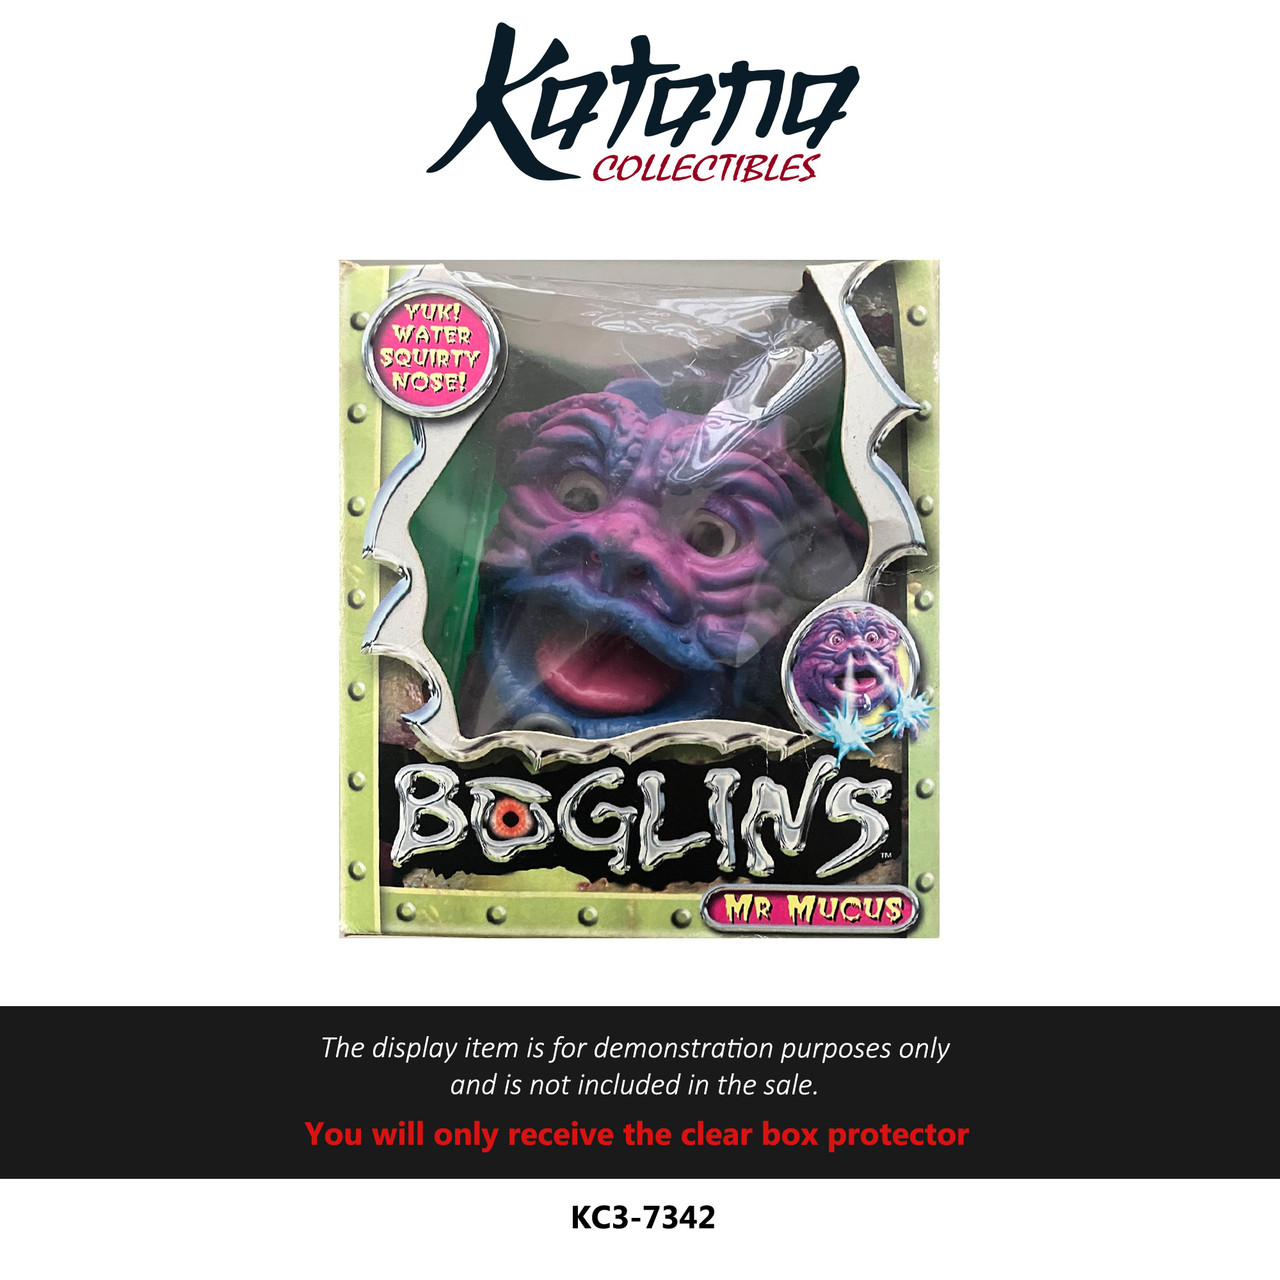 Katana Collectibles Protector For Boglins Mr. Mucus